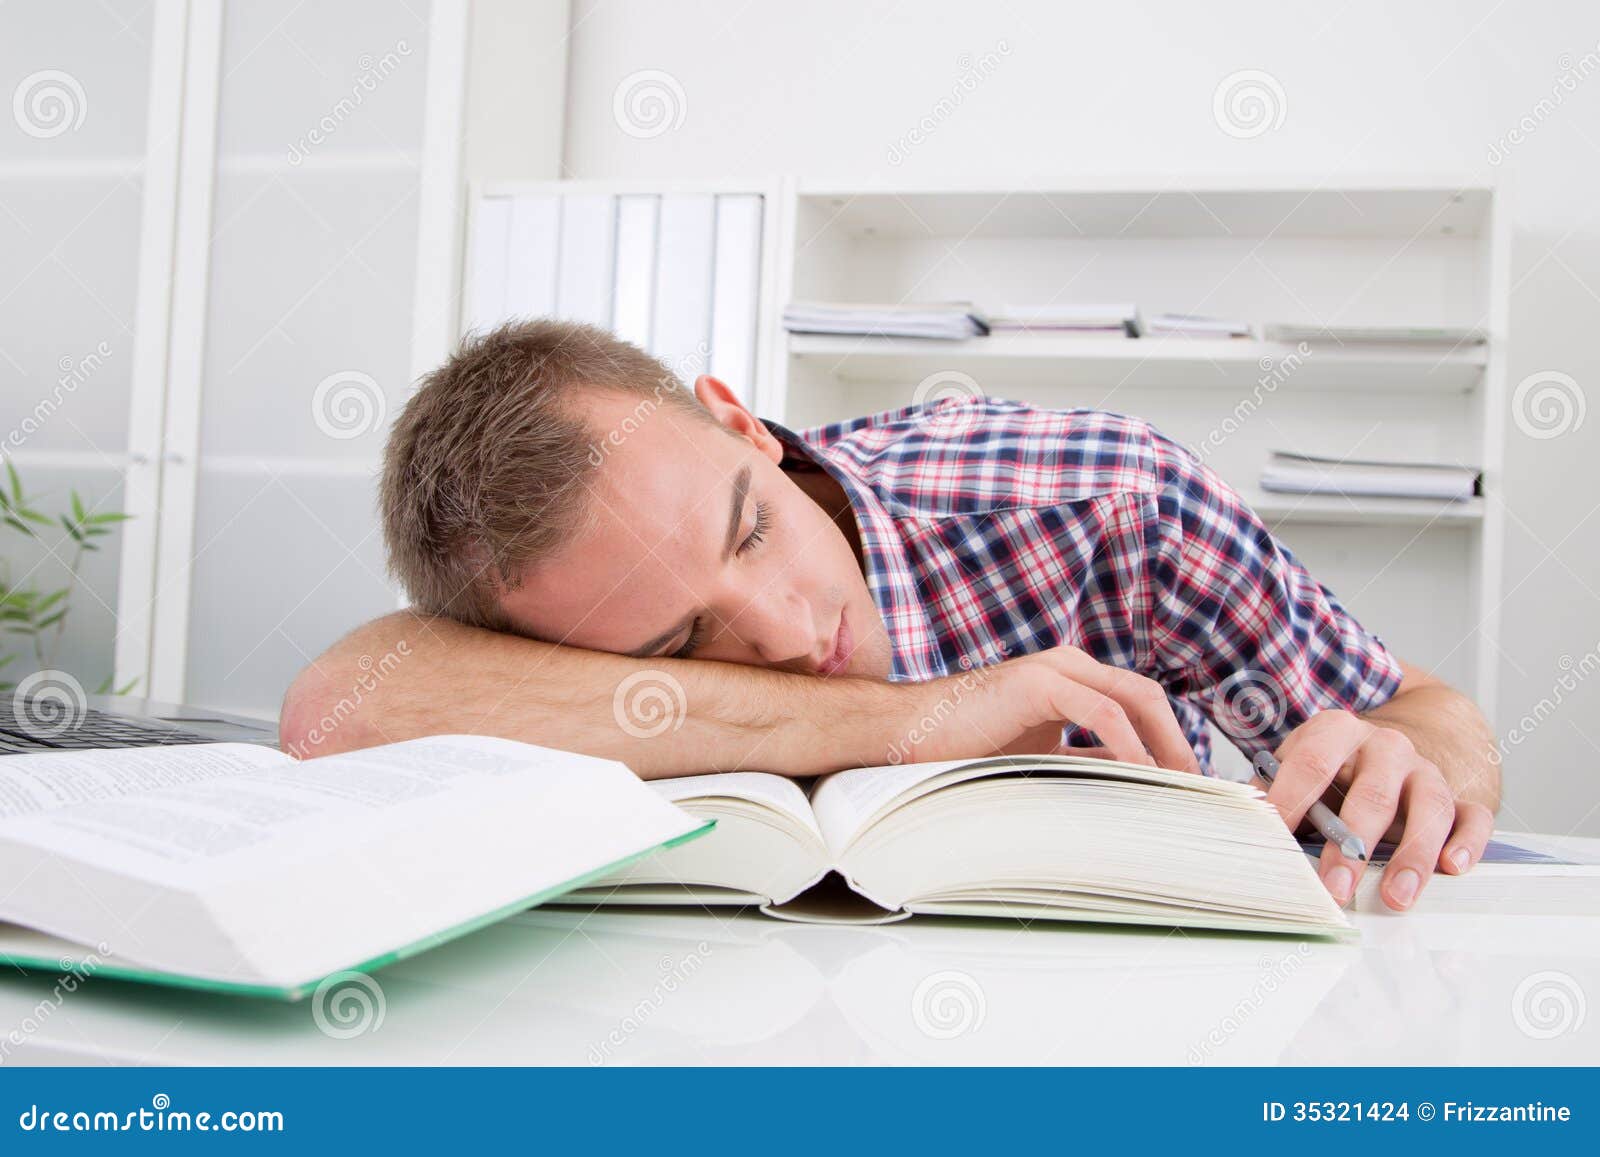 Student Sleeping At Desk Stock Photo Image Of Problem 35321424